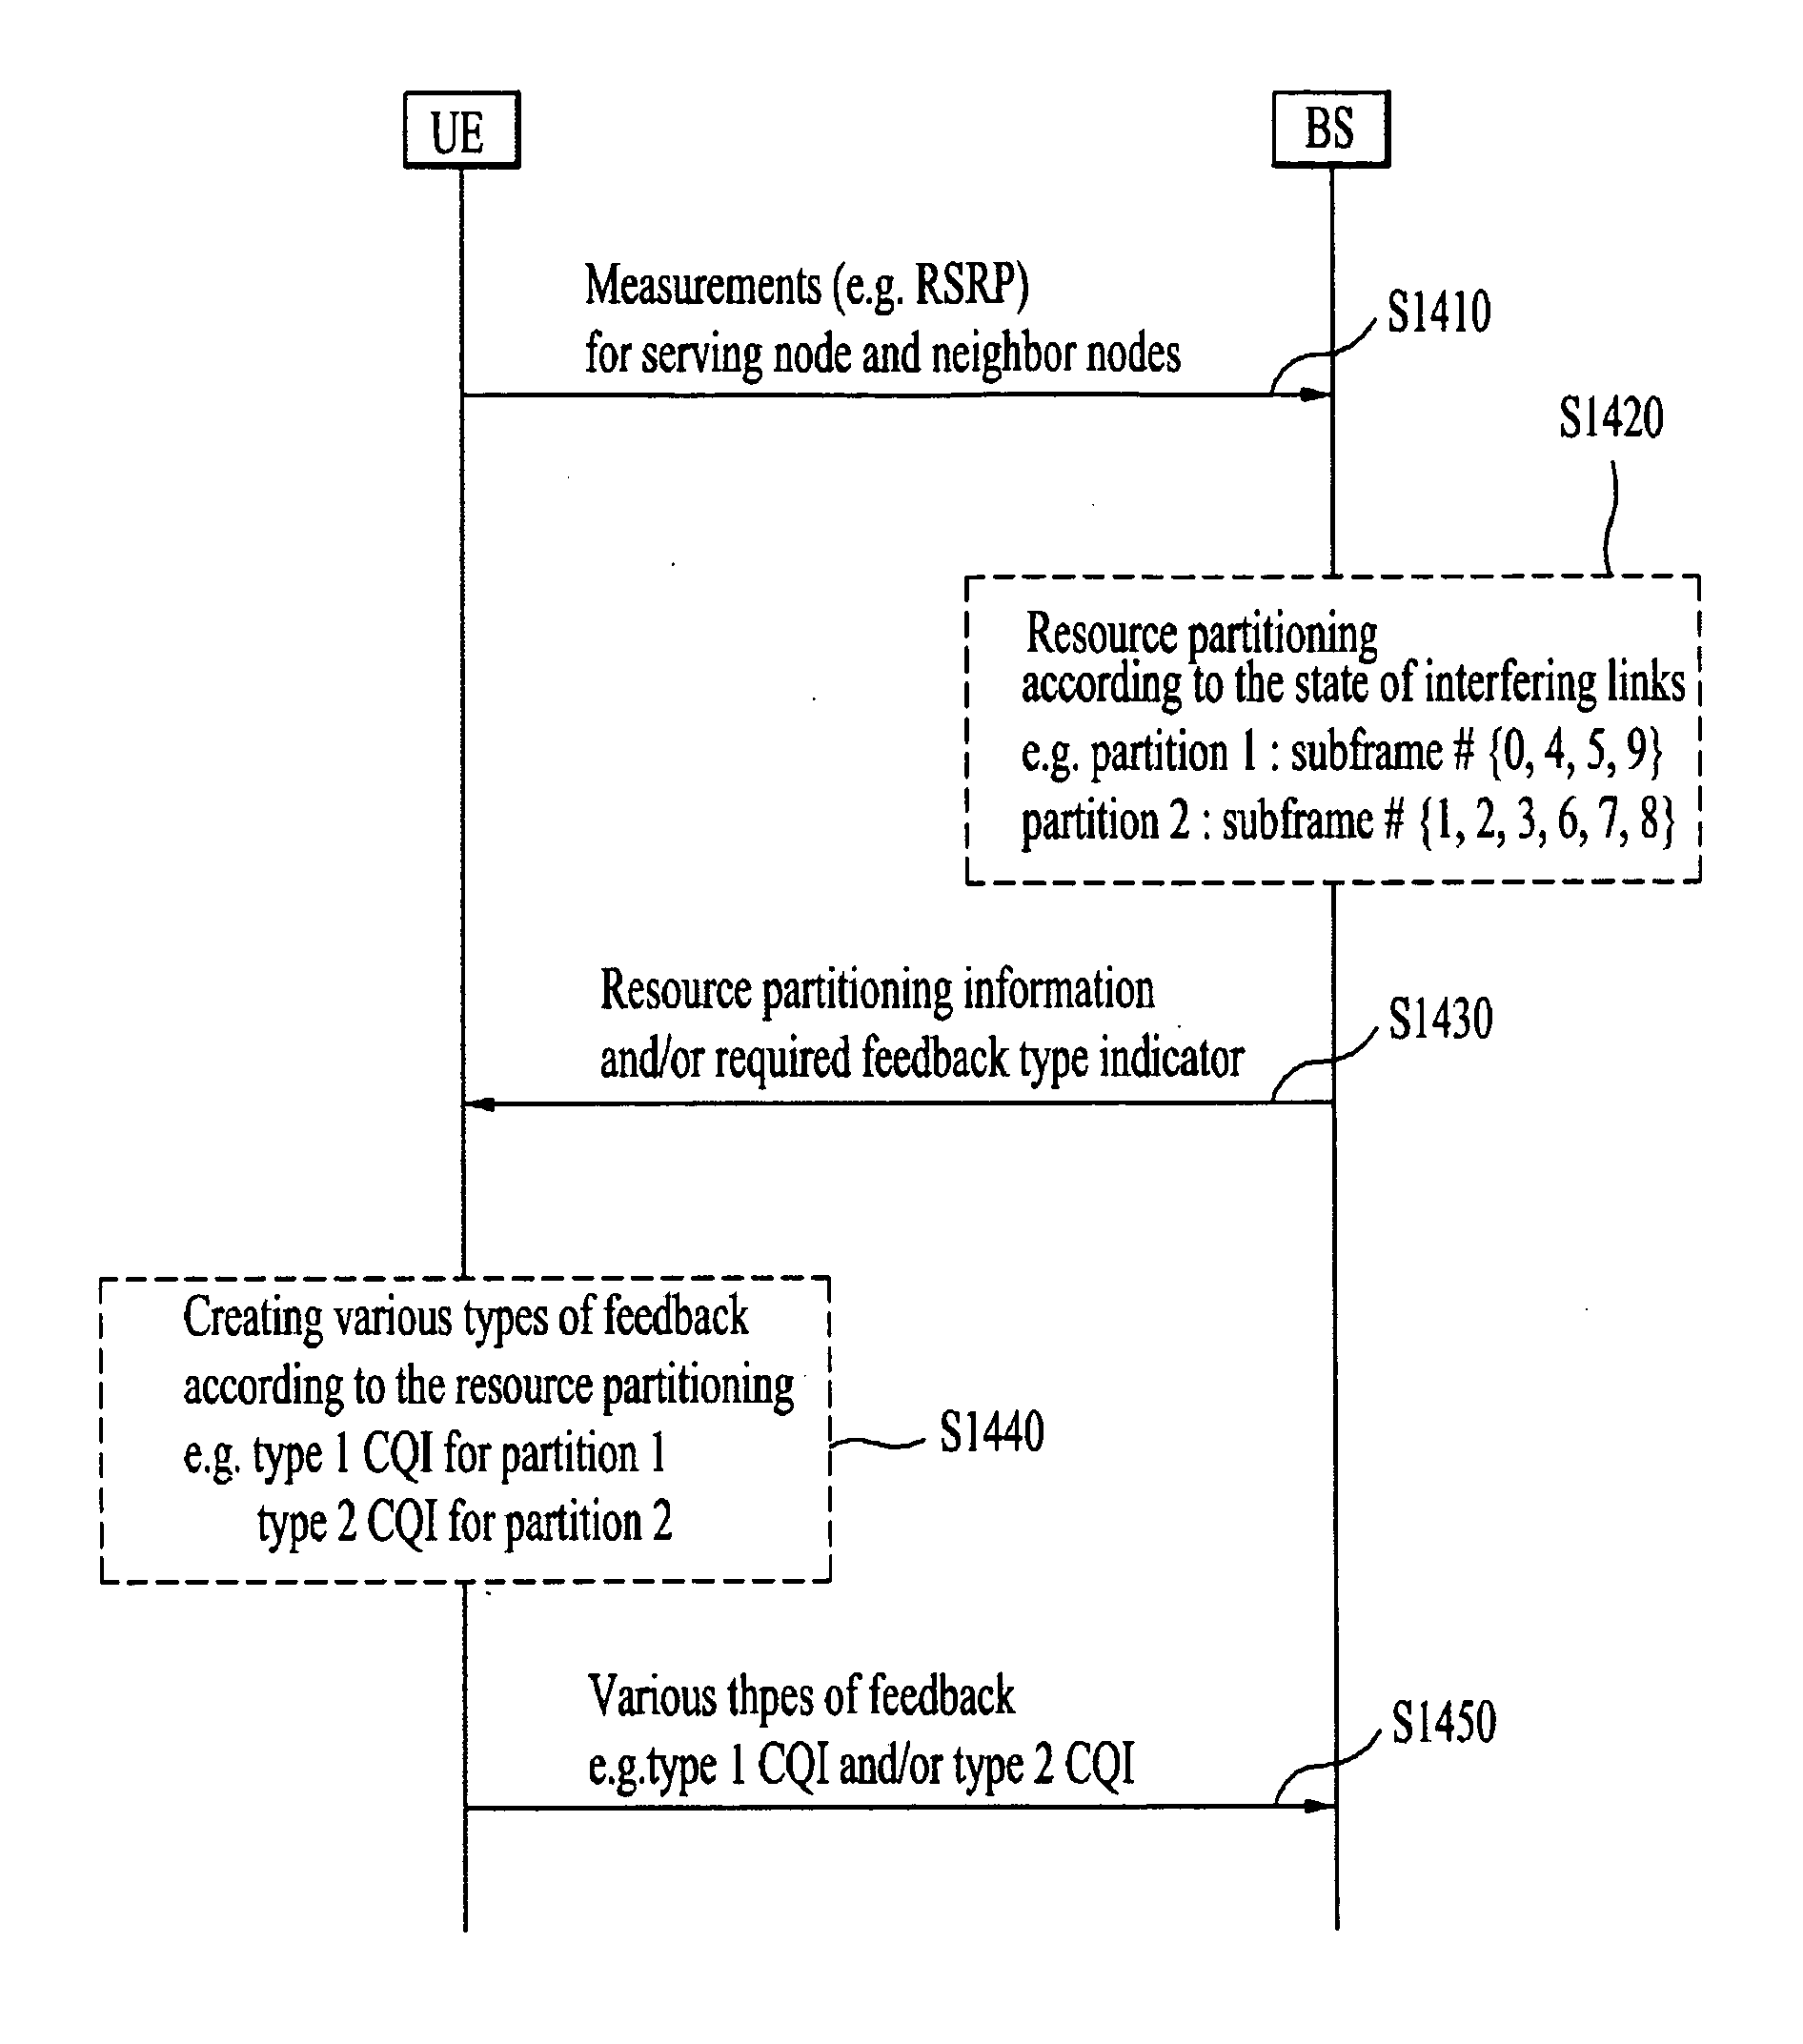 Apparatus and method for transmitting channel state information in a wireless communication system